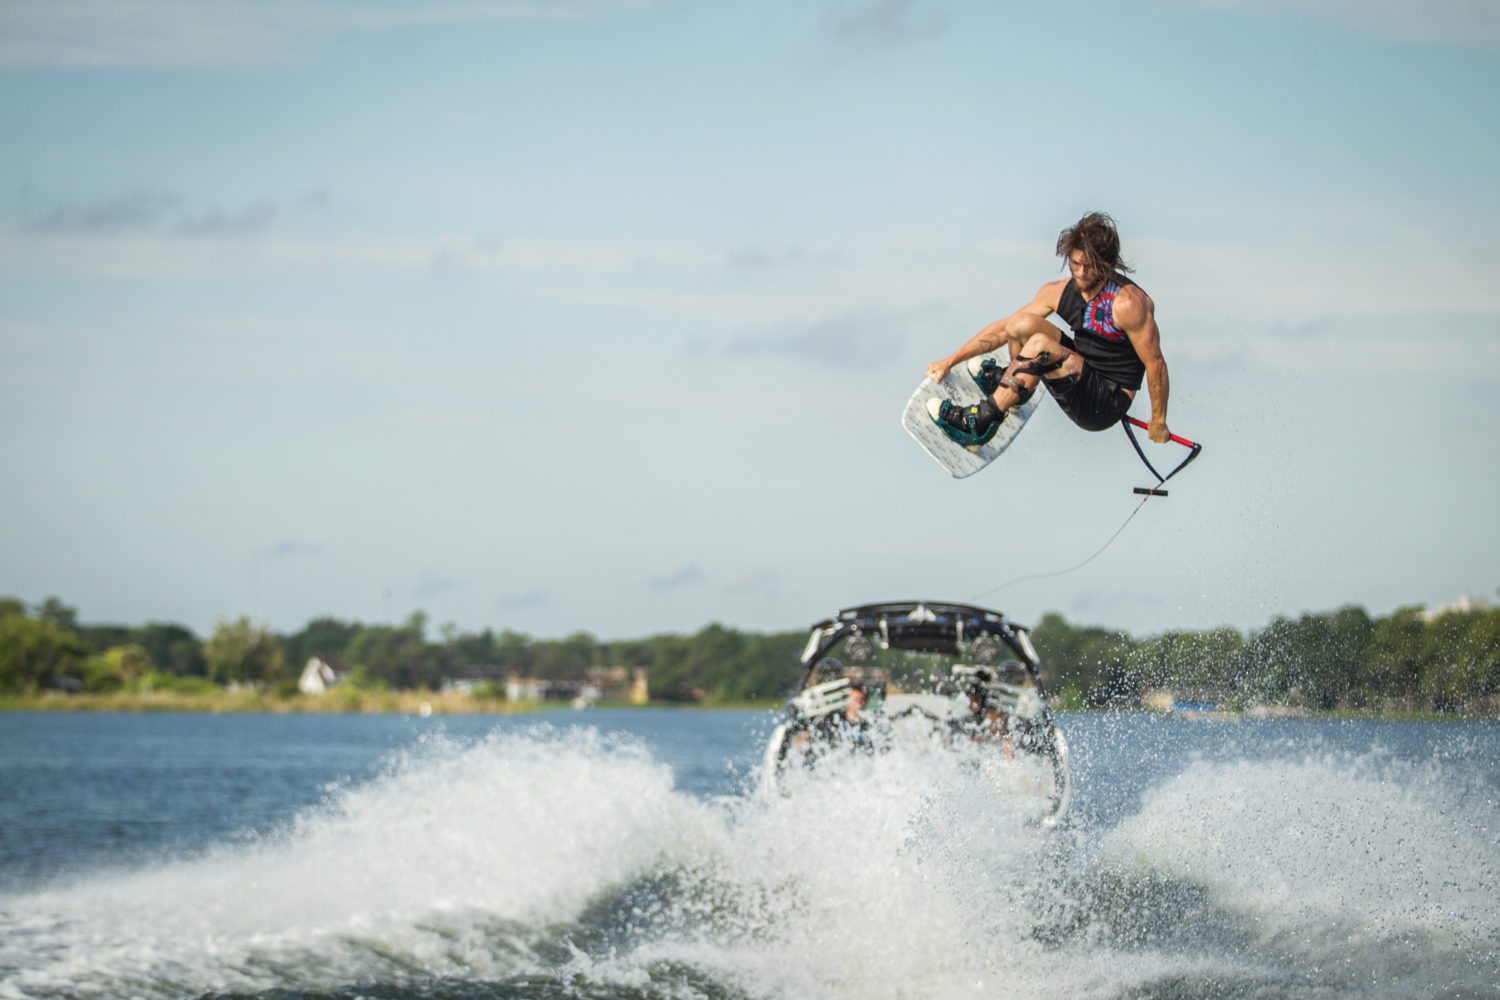 Aaron Rathy AR2 2017 wakeboard and signature boot shoot. 2017 Byerly boards Aaron Rathy Por Model. Wakebaord, wake board, aaron rathy, rathy, byerly,